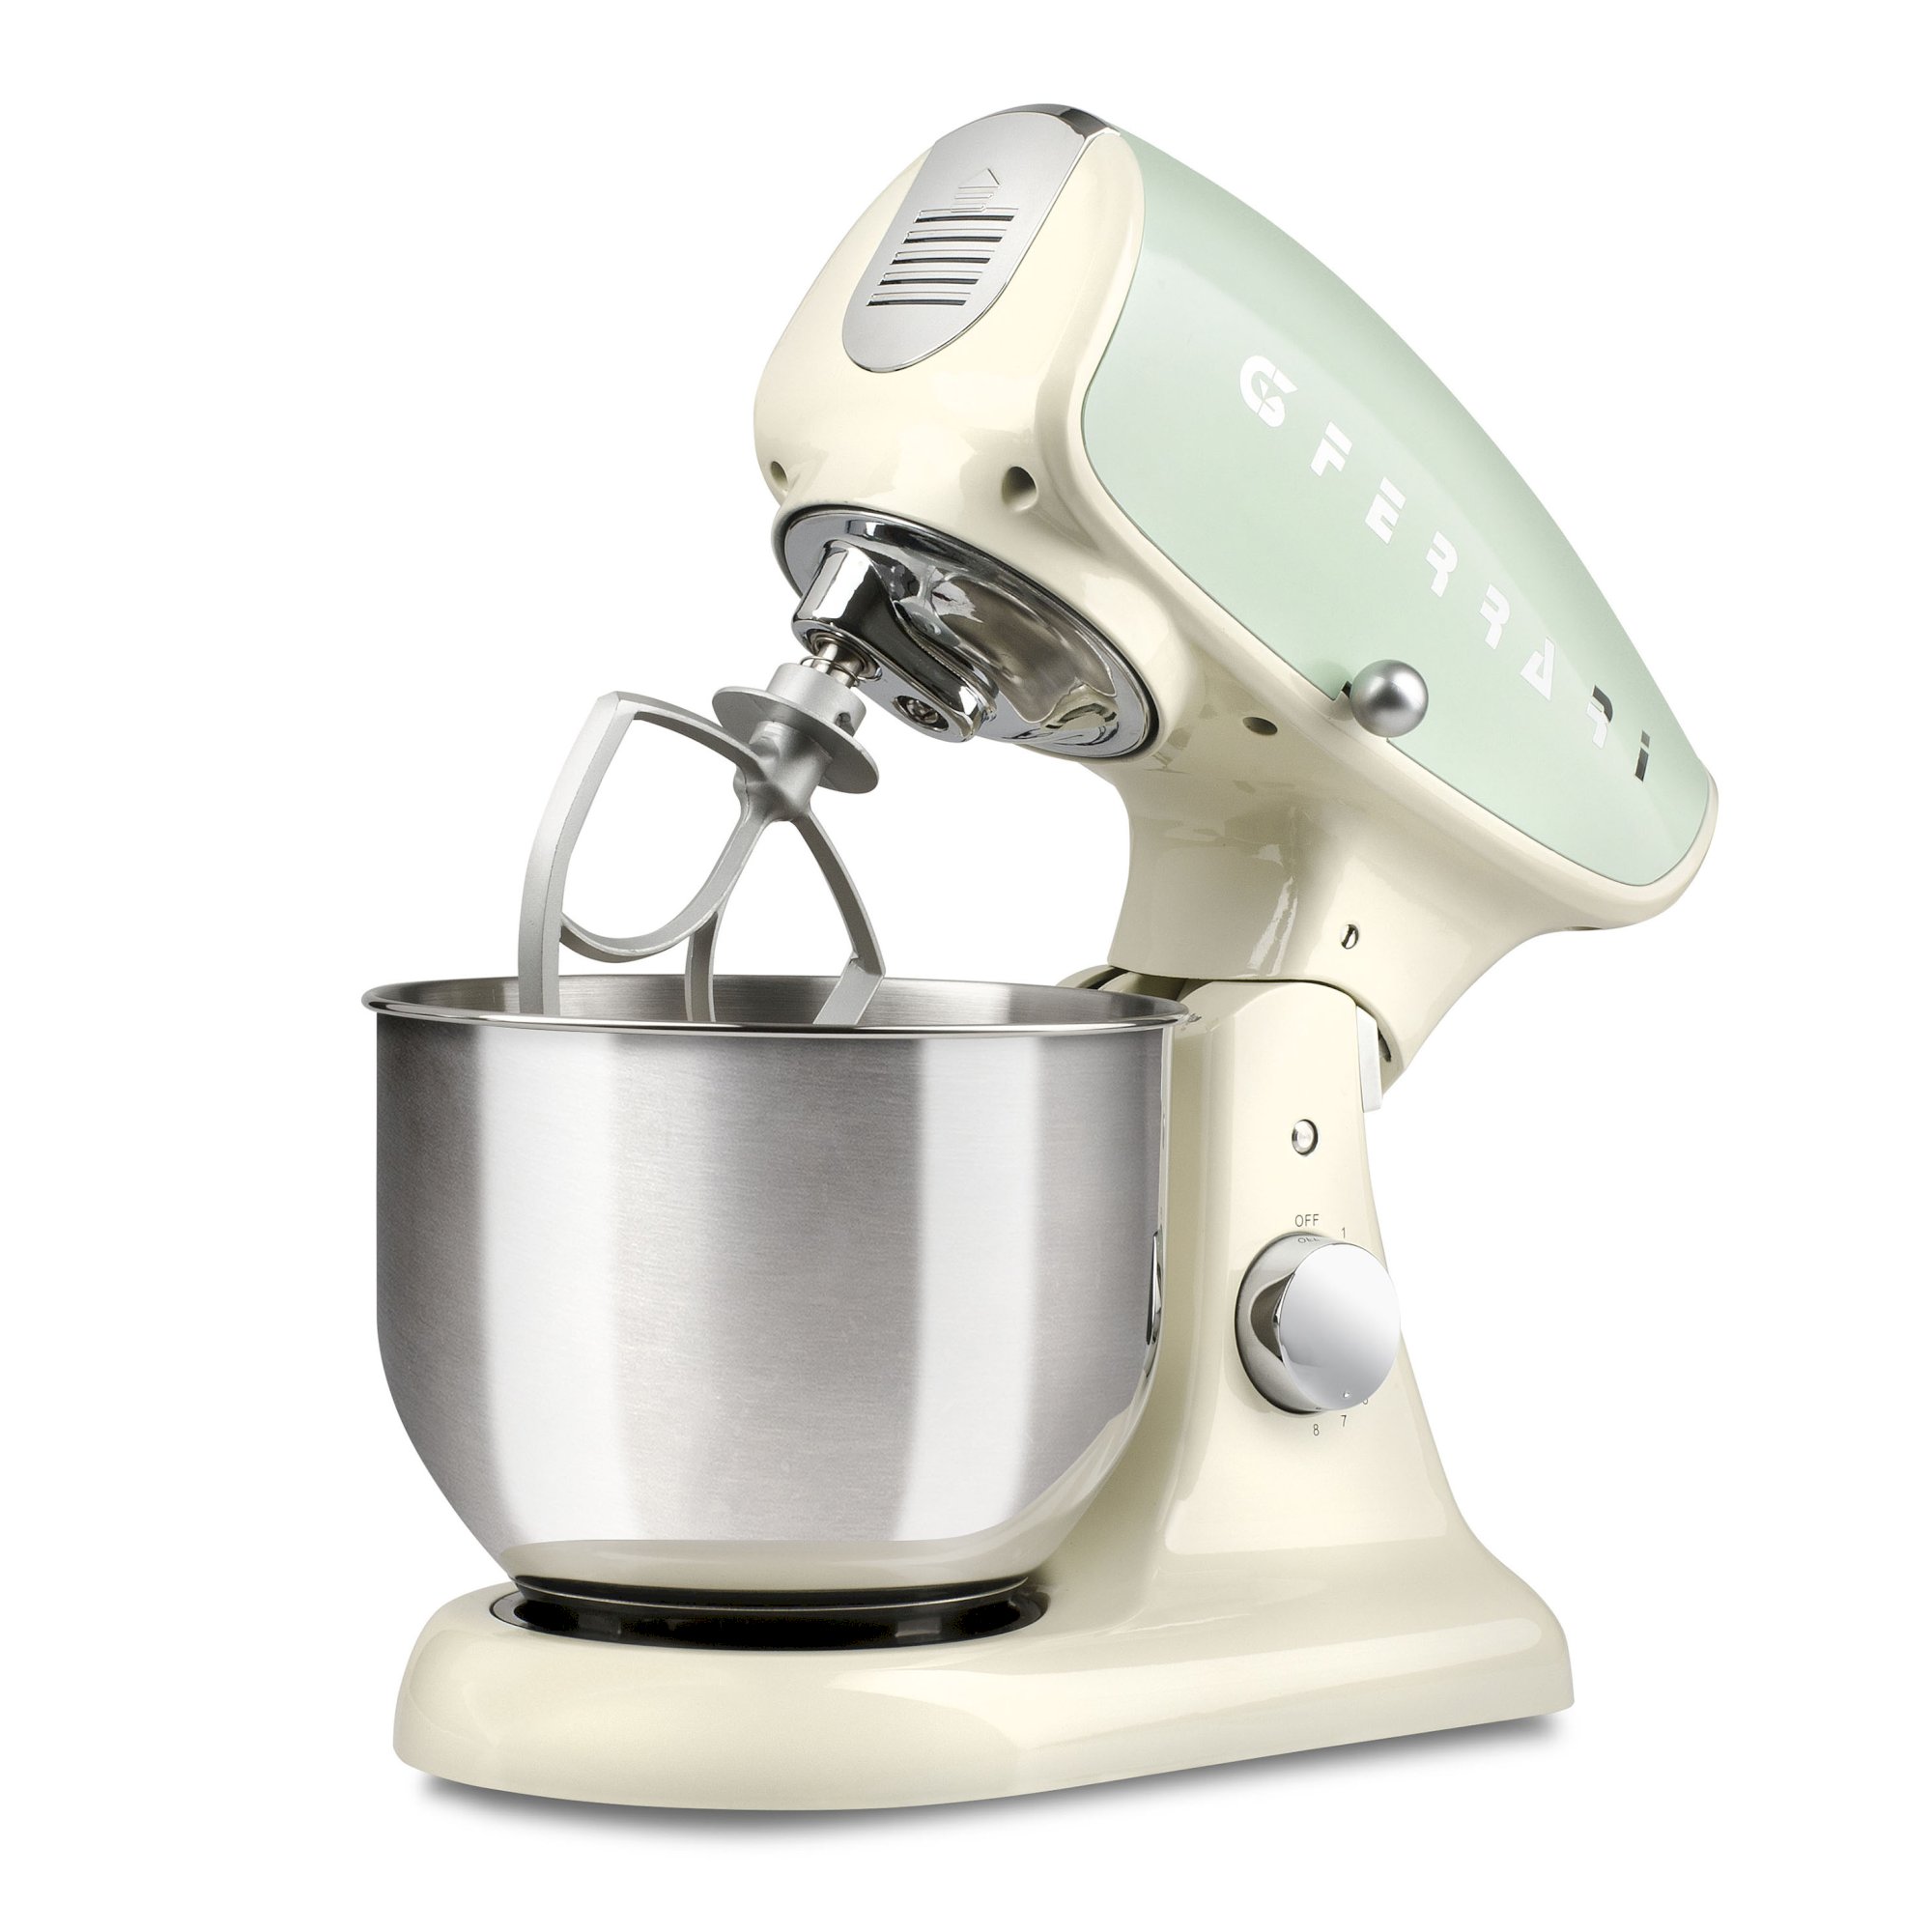 G2007505, Pastaio Deluxe, stand mixer, 5,2L, 1200W, crme/groen